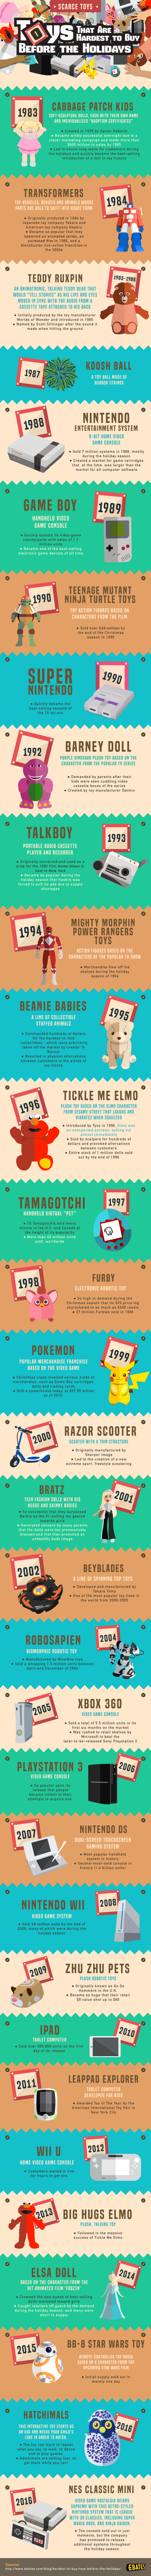 The Most Popular Toys Through the Decades